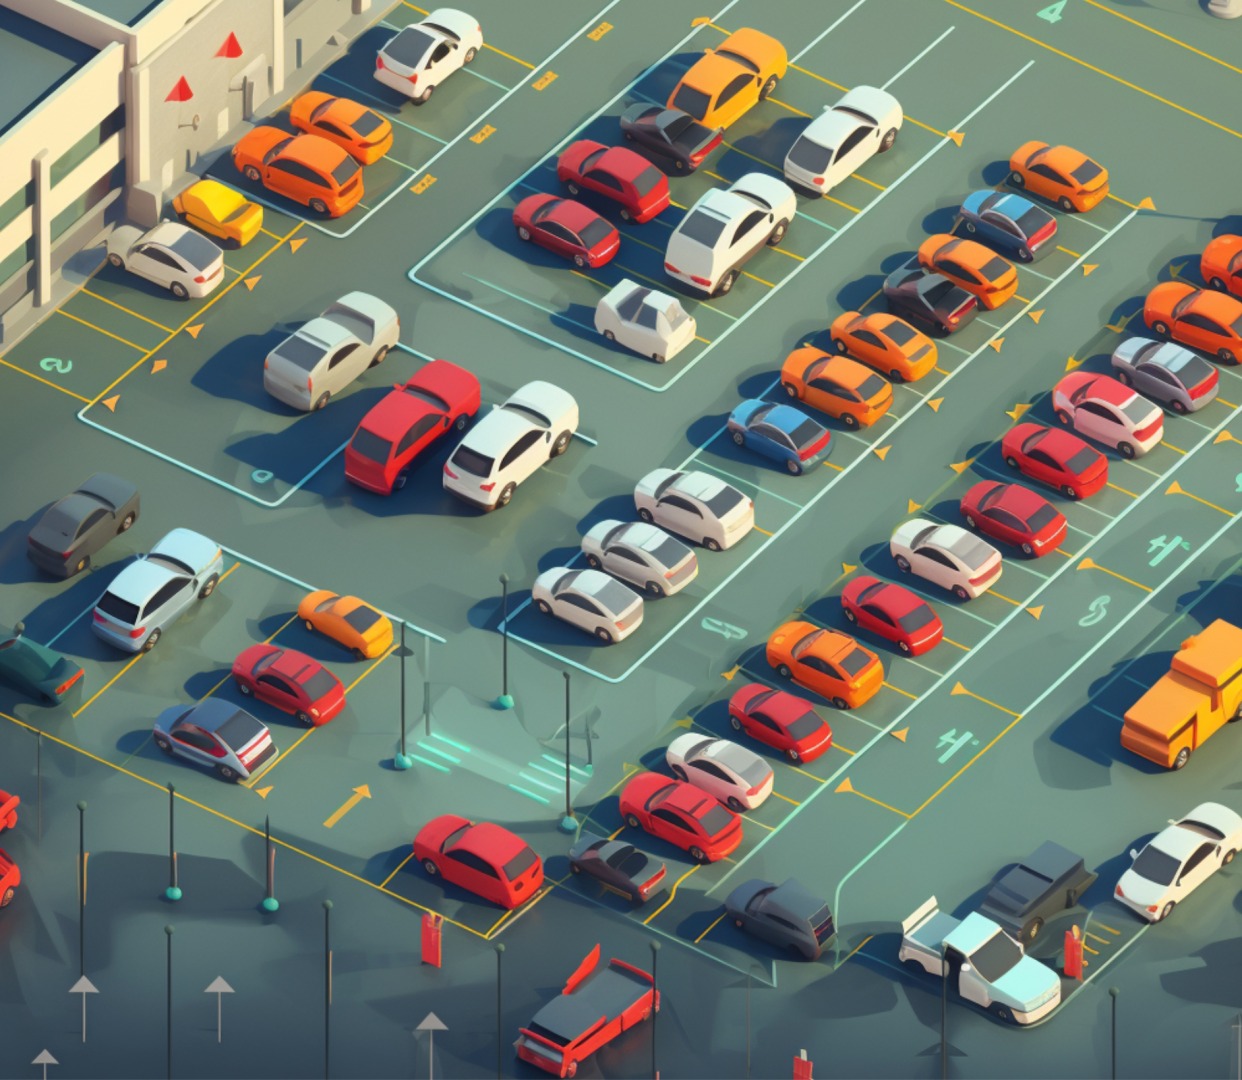 Best Practices to Protect Customer Data in Automated Parking